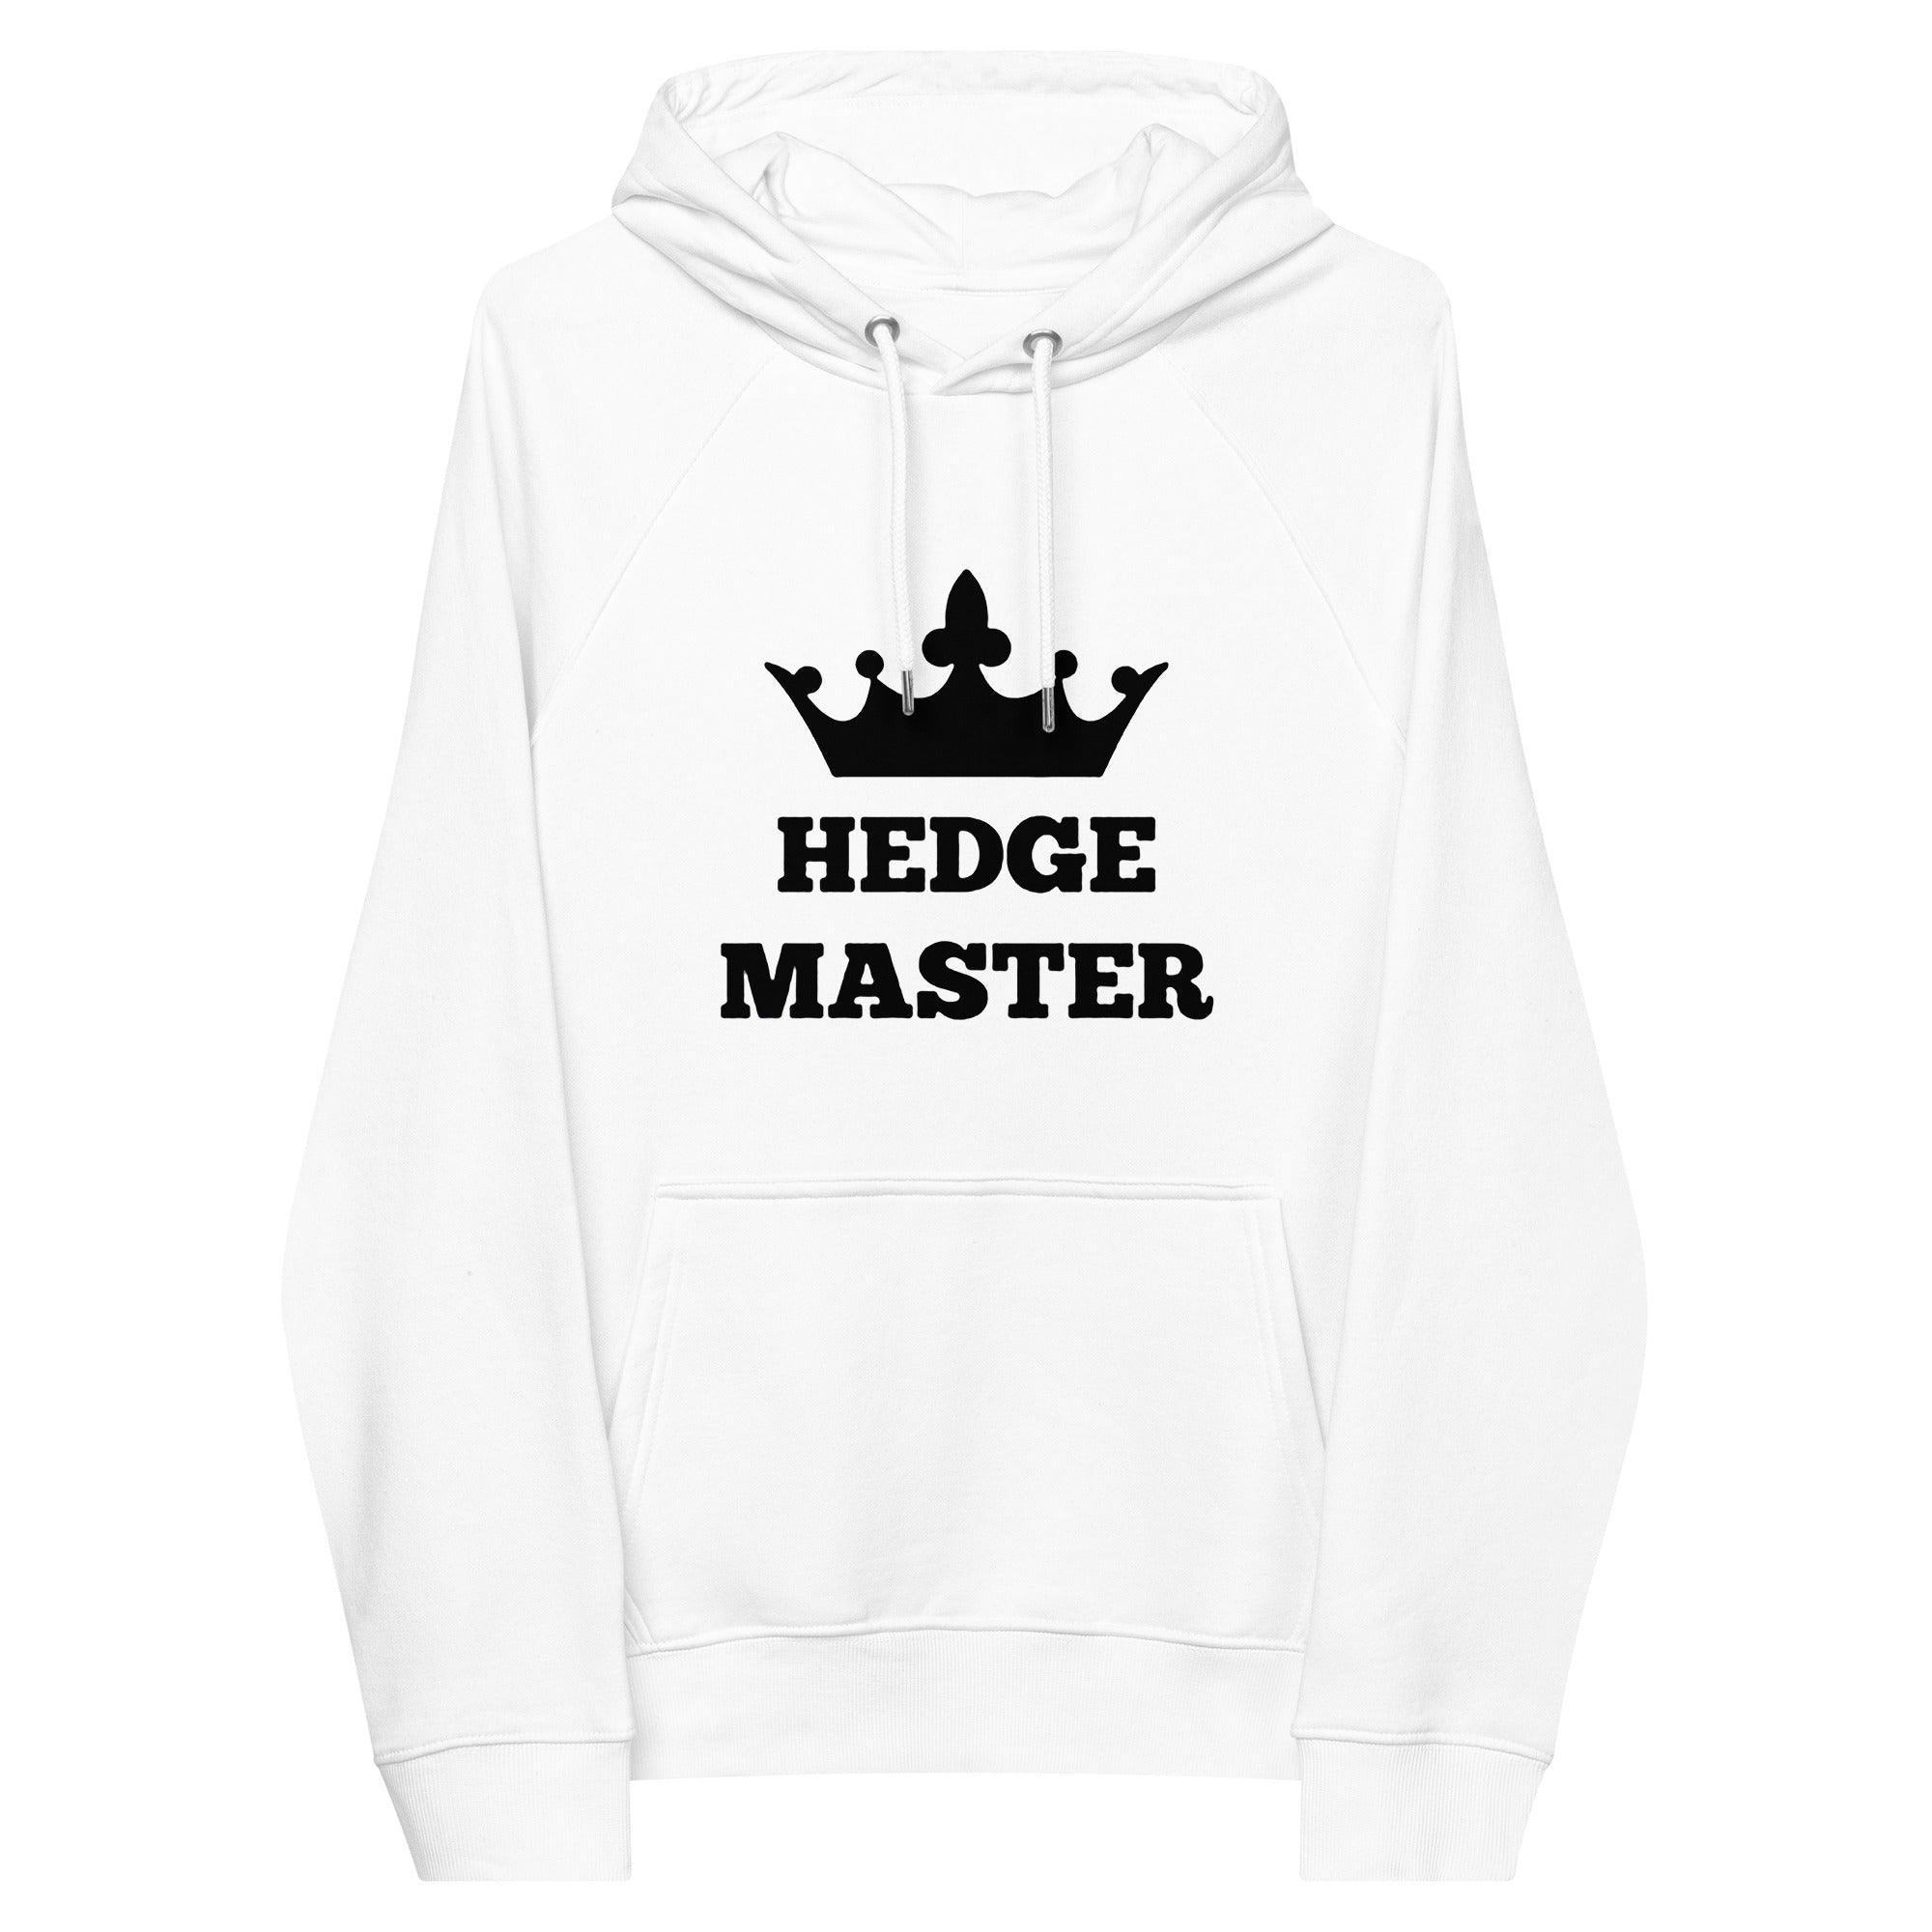 Hedge Master Pullover Hoodie - InvestmenTees